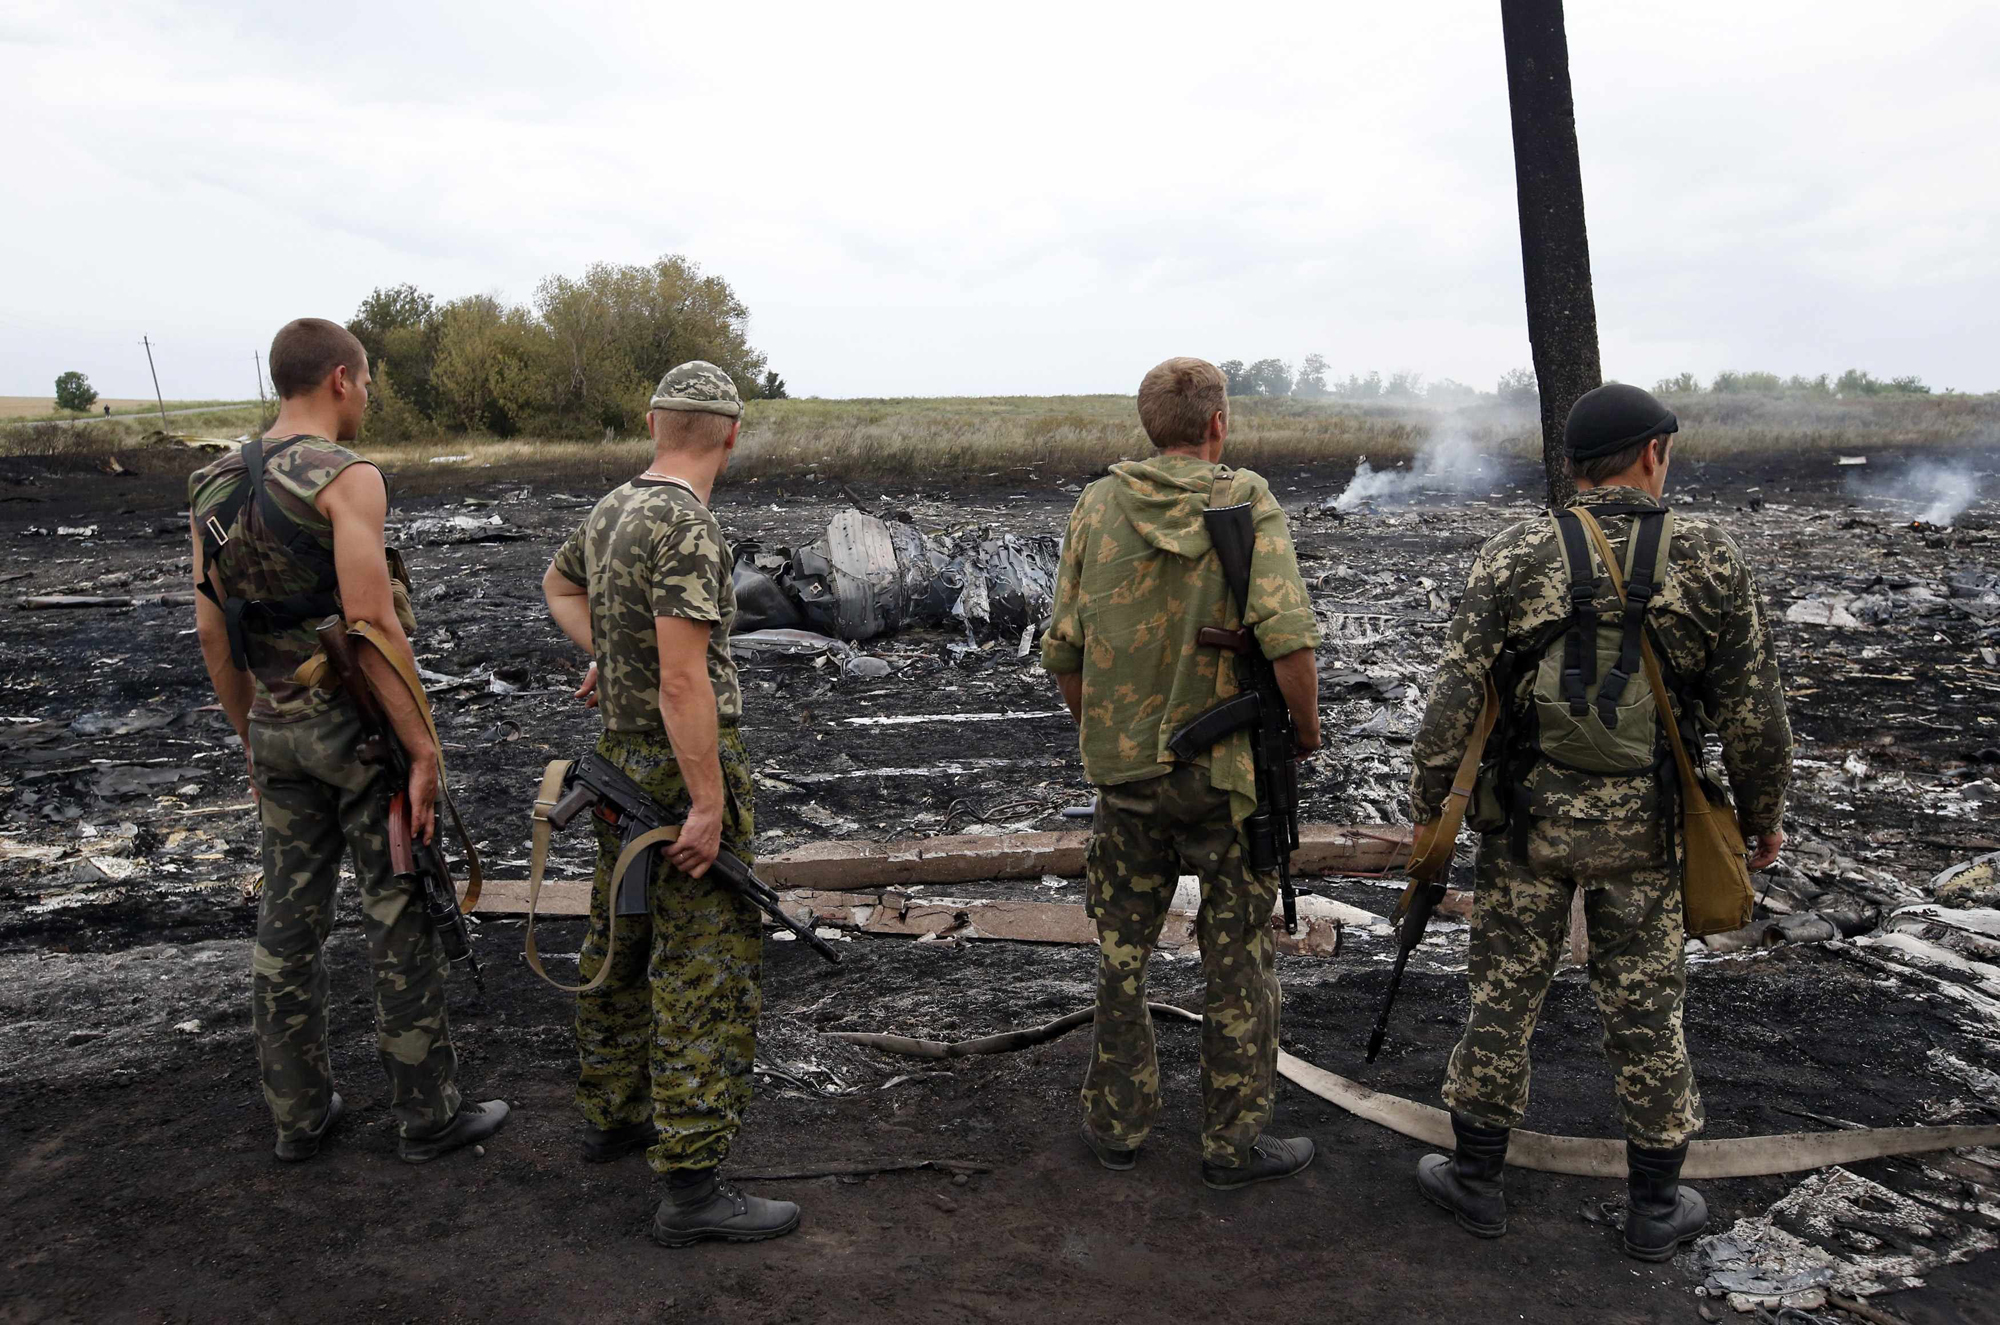 Armed pro-Russian separatists stand at the site of a Malaysia Airlines Boeing 777 plane crash near the settlement of Grabovo in the Donetsk region, July 17, 2014.